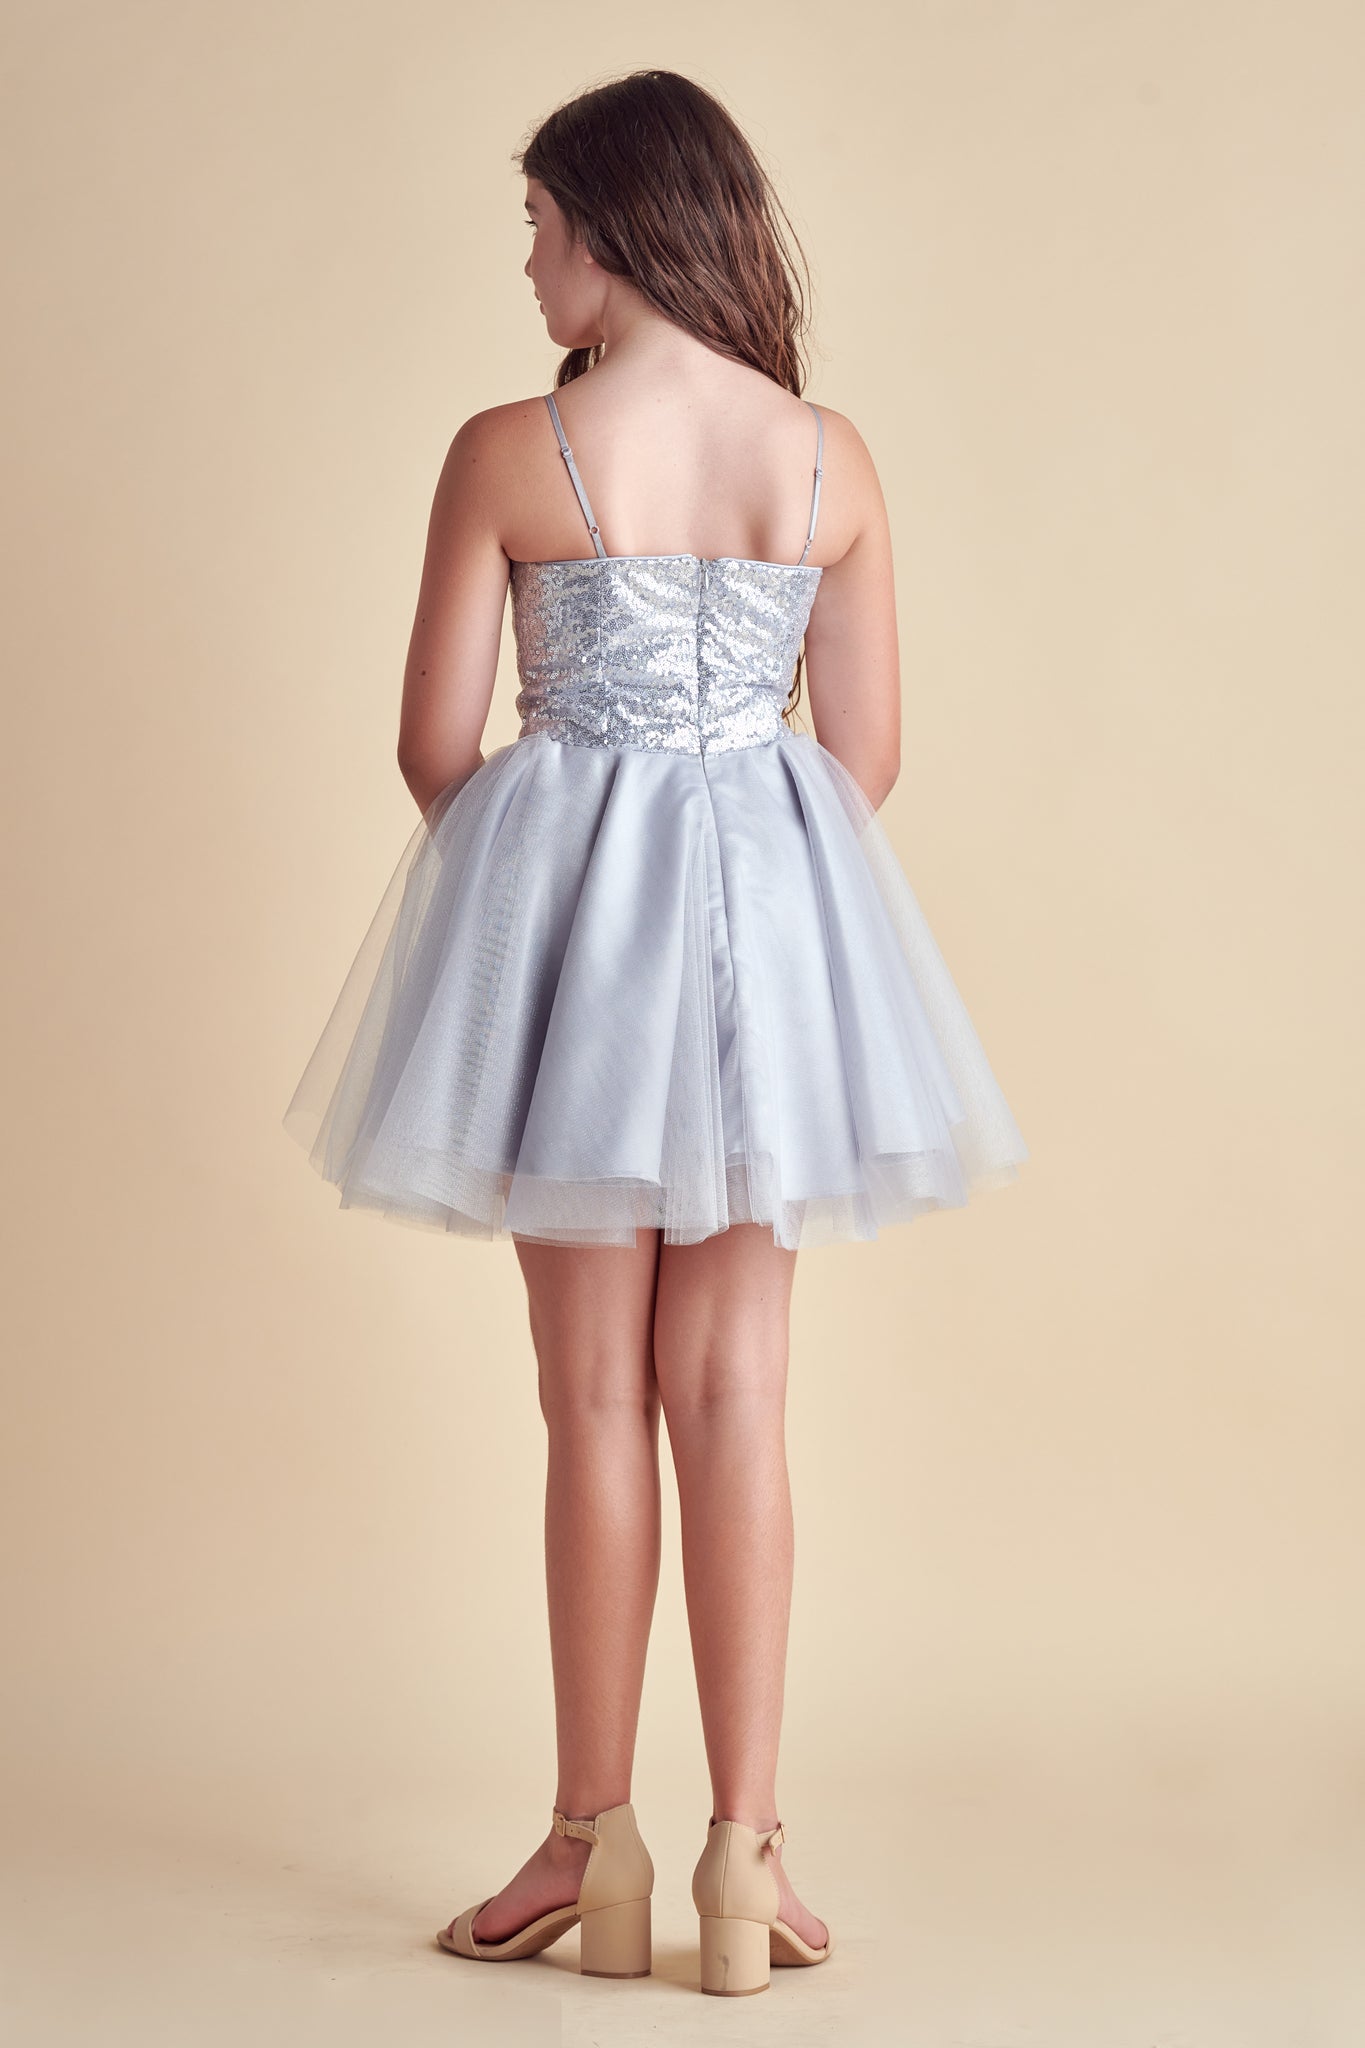 This is sequin bodice dress in silver with full tulle skirt with adjustable straps. Hits above the knee with zipper back detailing. This perfect bat mitzvah dress or party outfit for any girl.